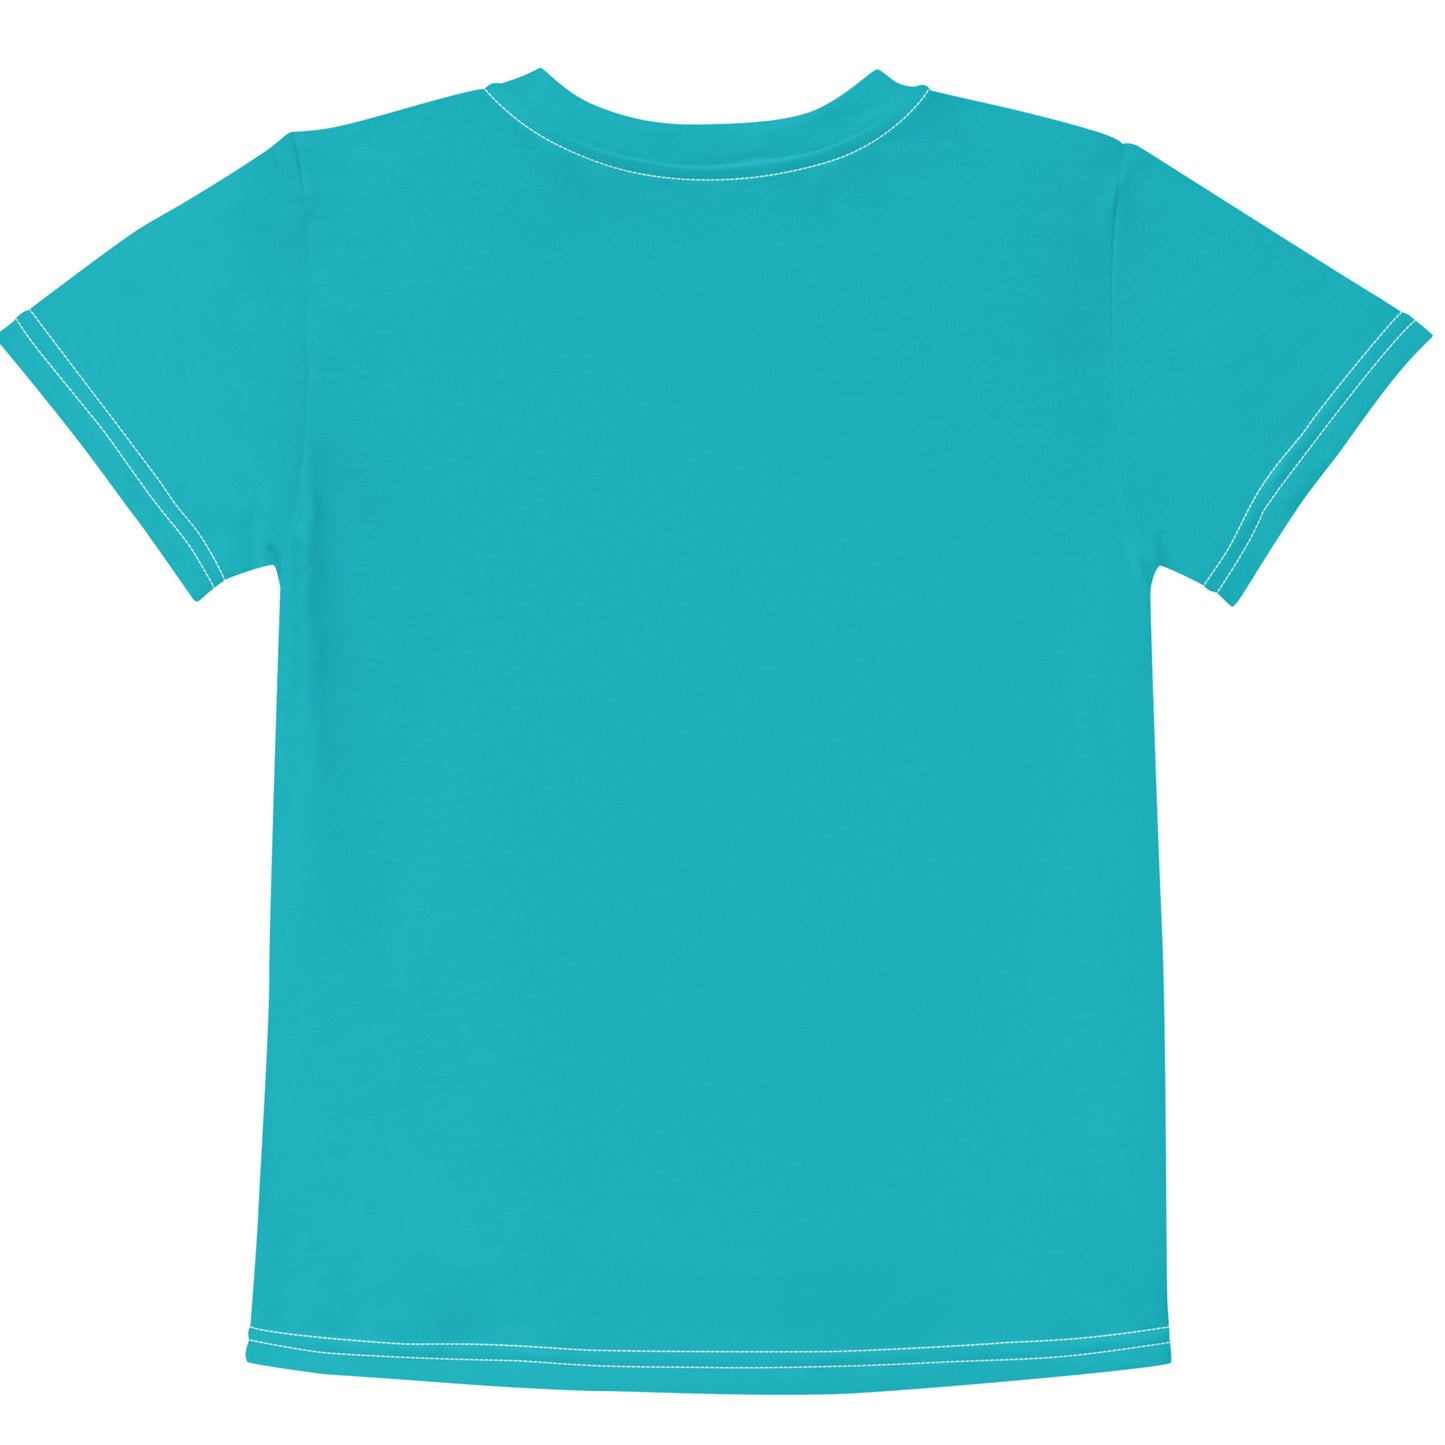 Cyan Climate Change Global Warming Statement - Sustainably Made Kid's T-Shirt